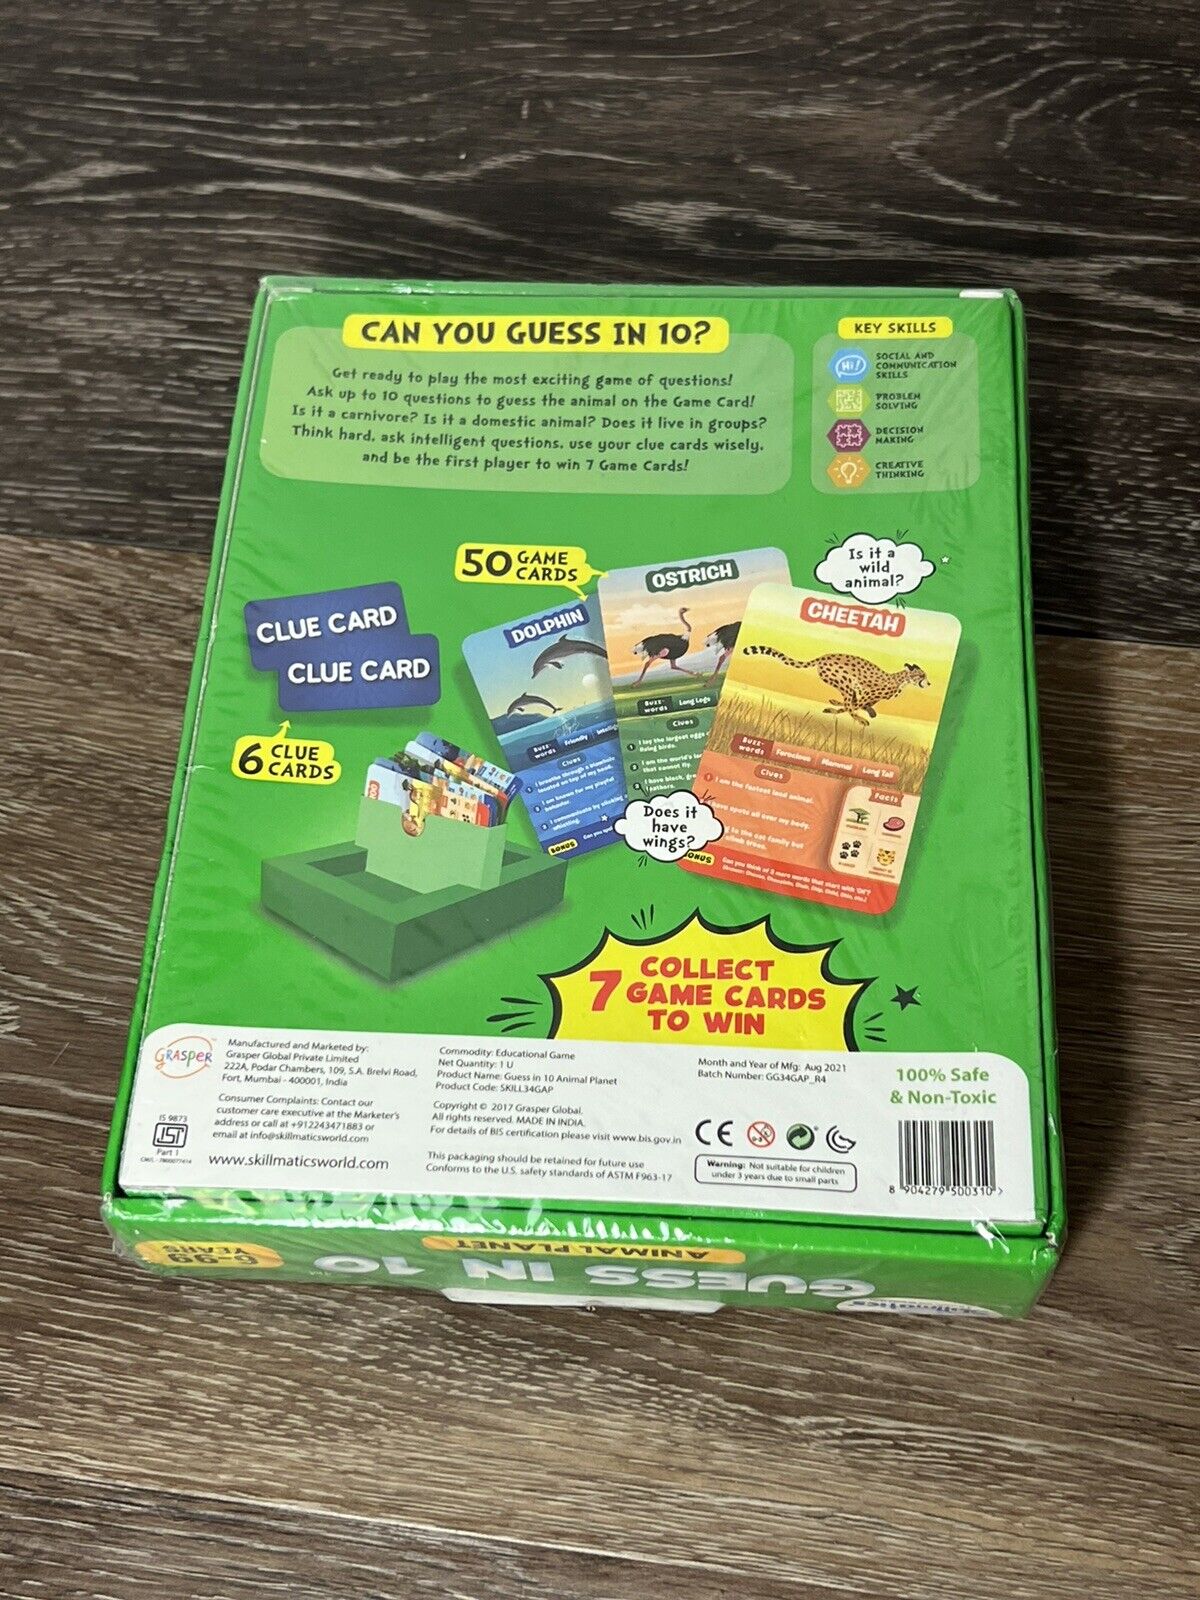 Skillmatics Guess in 10 Educational Kids Adults Card Game-Animal Planet  6-99 Yrs | eBay